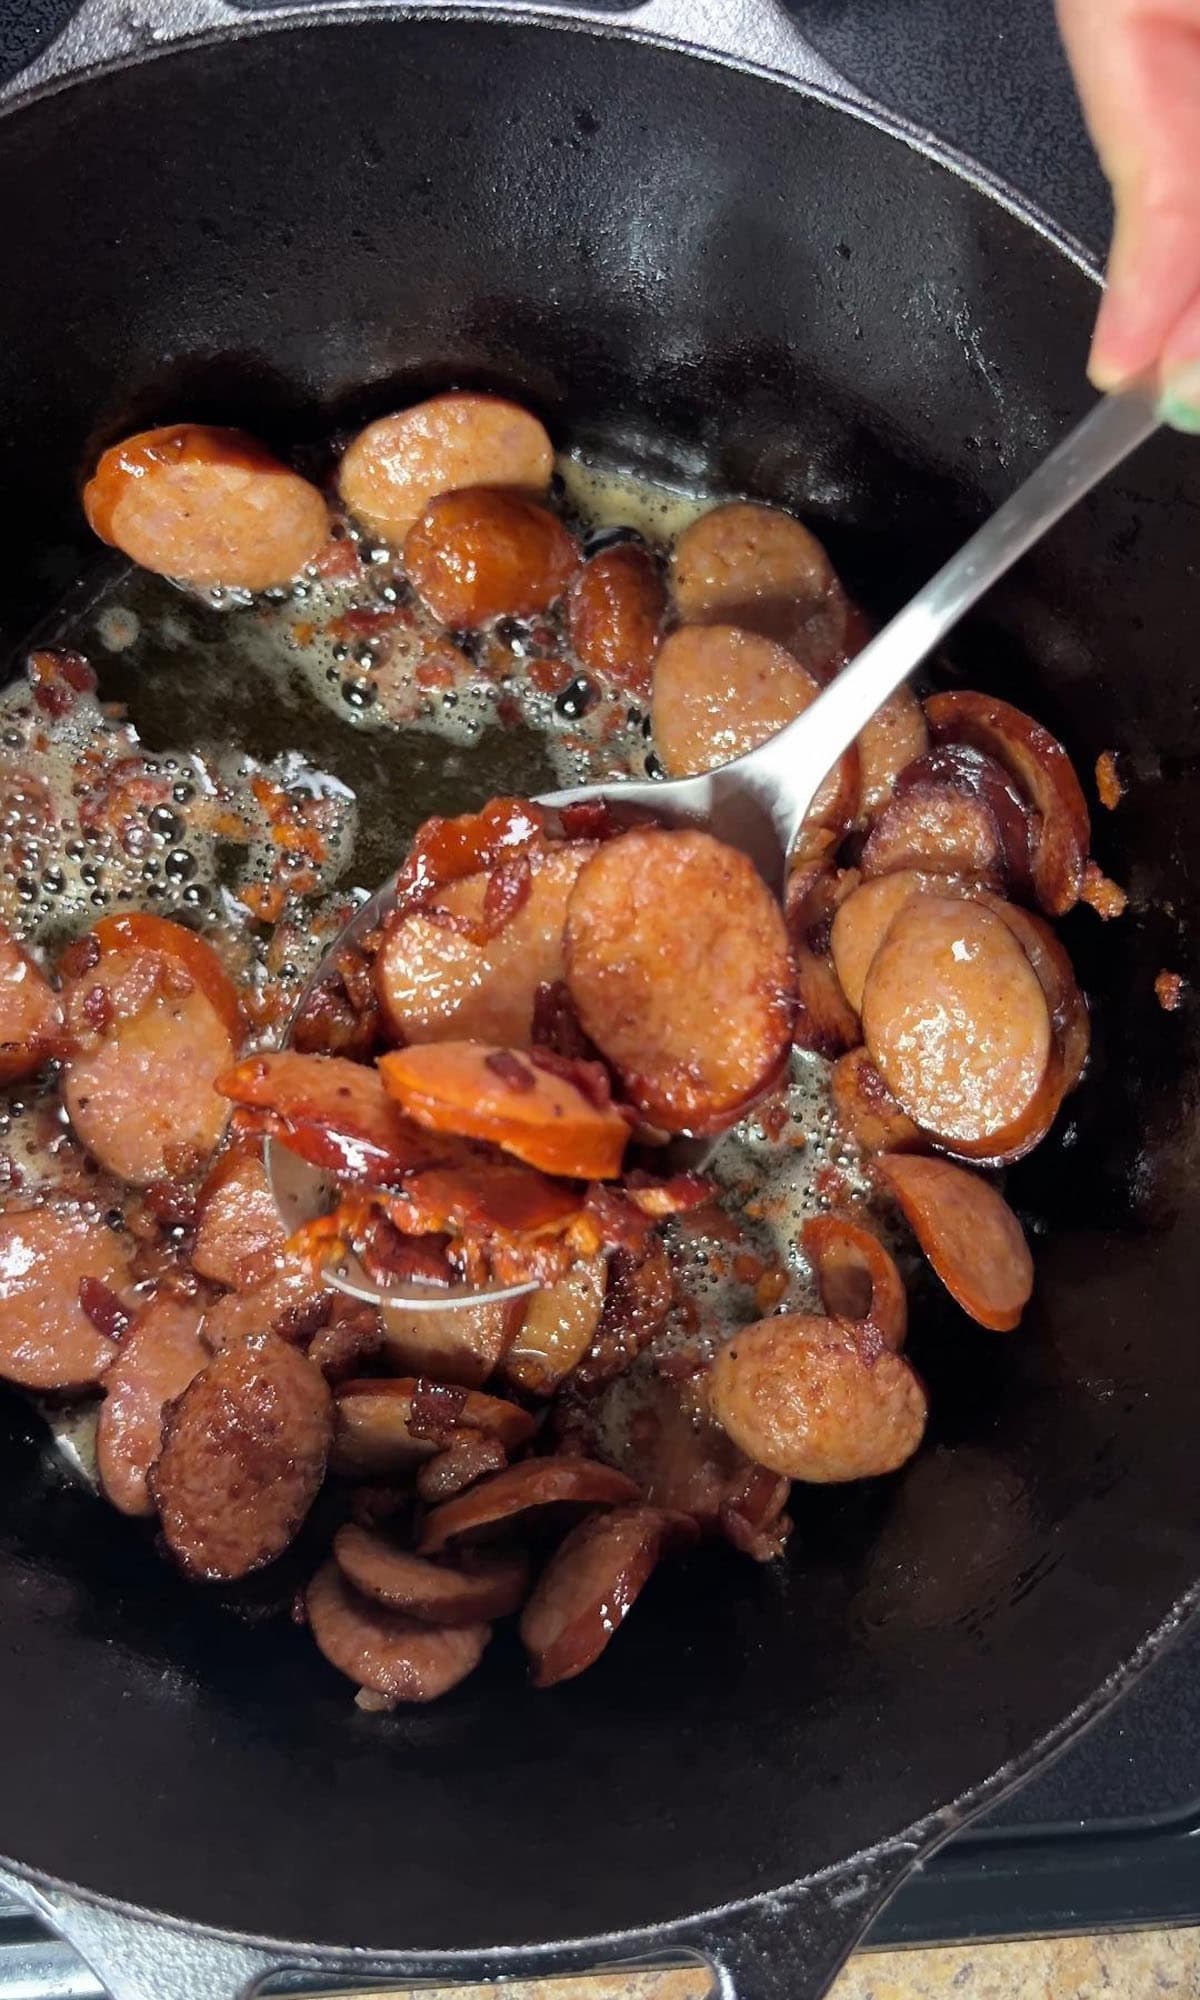 Using a slotted spoon to remove the fried smoked sausage and bacon from a Dutch oven.